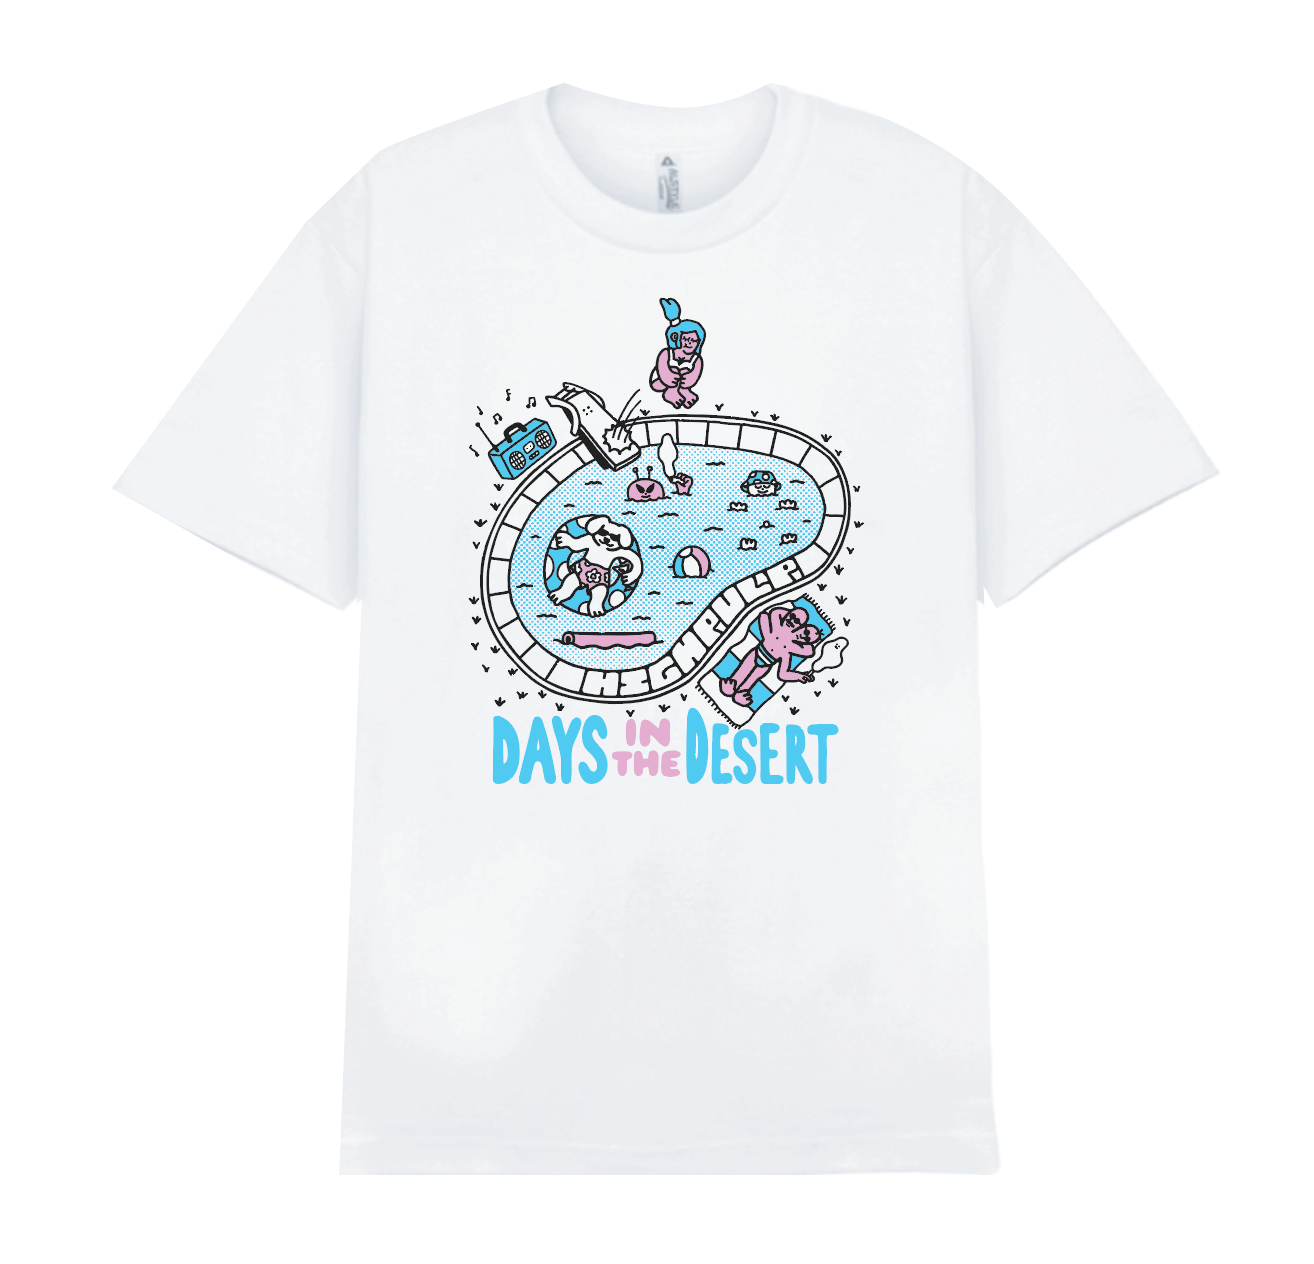 Short Sleeve T-shirt - Pool Party Design (Days in the Desert official)